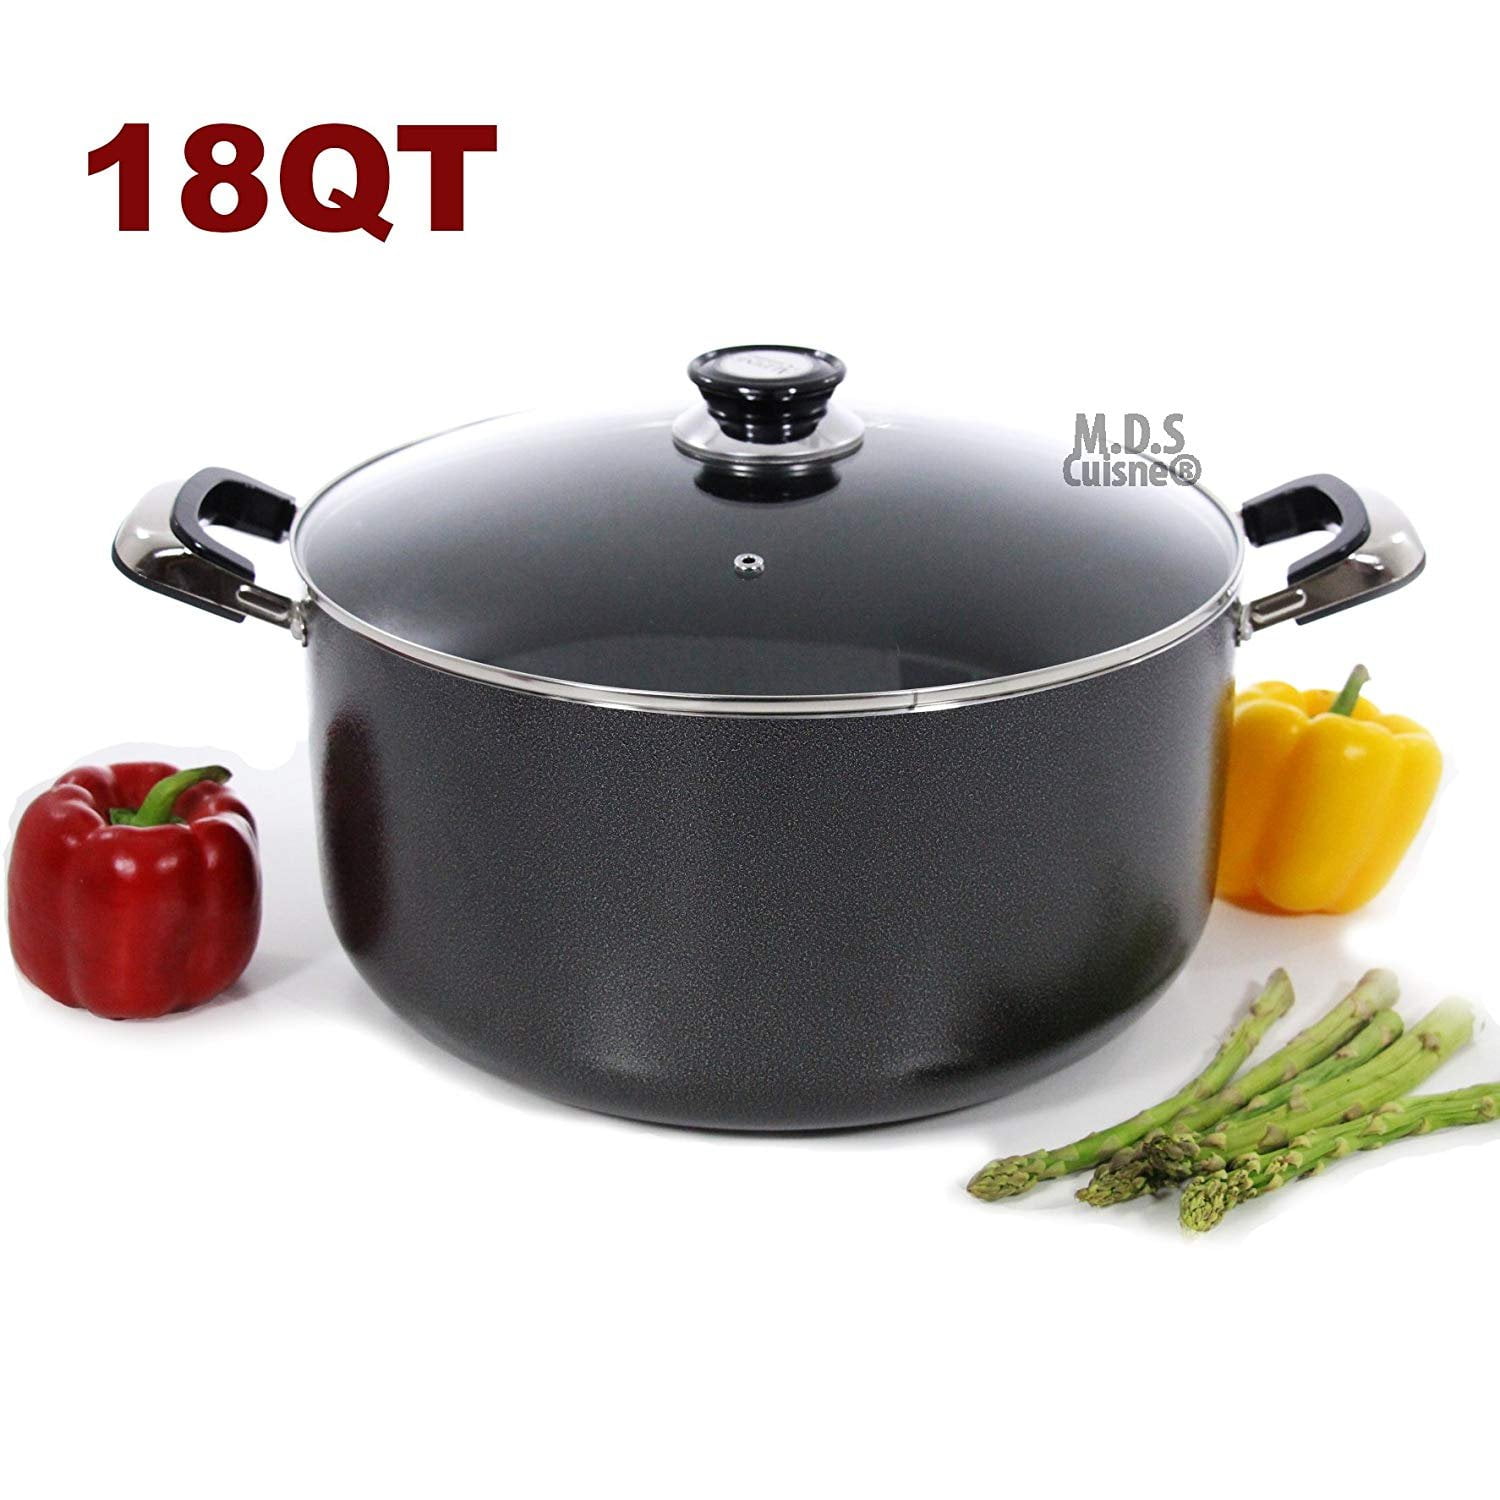 Titanium Non-Stick PFOA Free Coating Cooking Pot Casserole Dish Stock Pot HAYDEN Dutch Oven with Lid 28CM/8 Liters Induction All Hobs Suitable Cast Aluminium Covered Rose Red